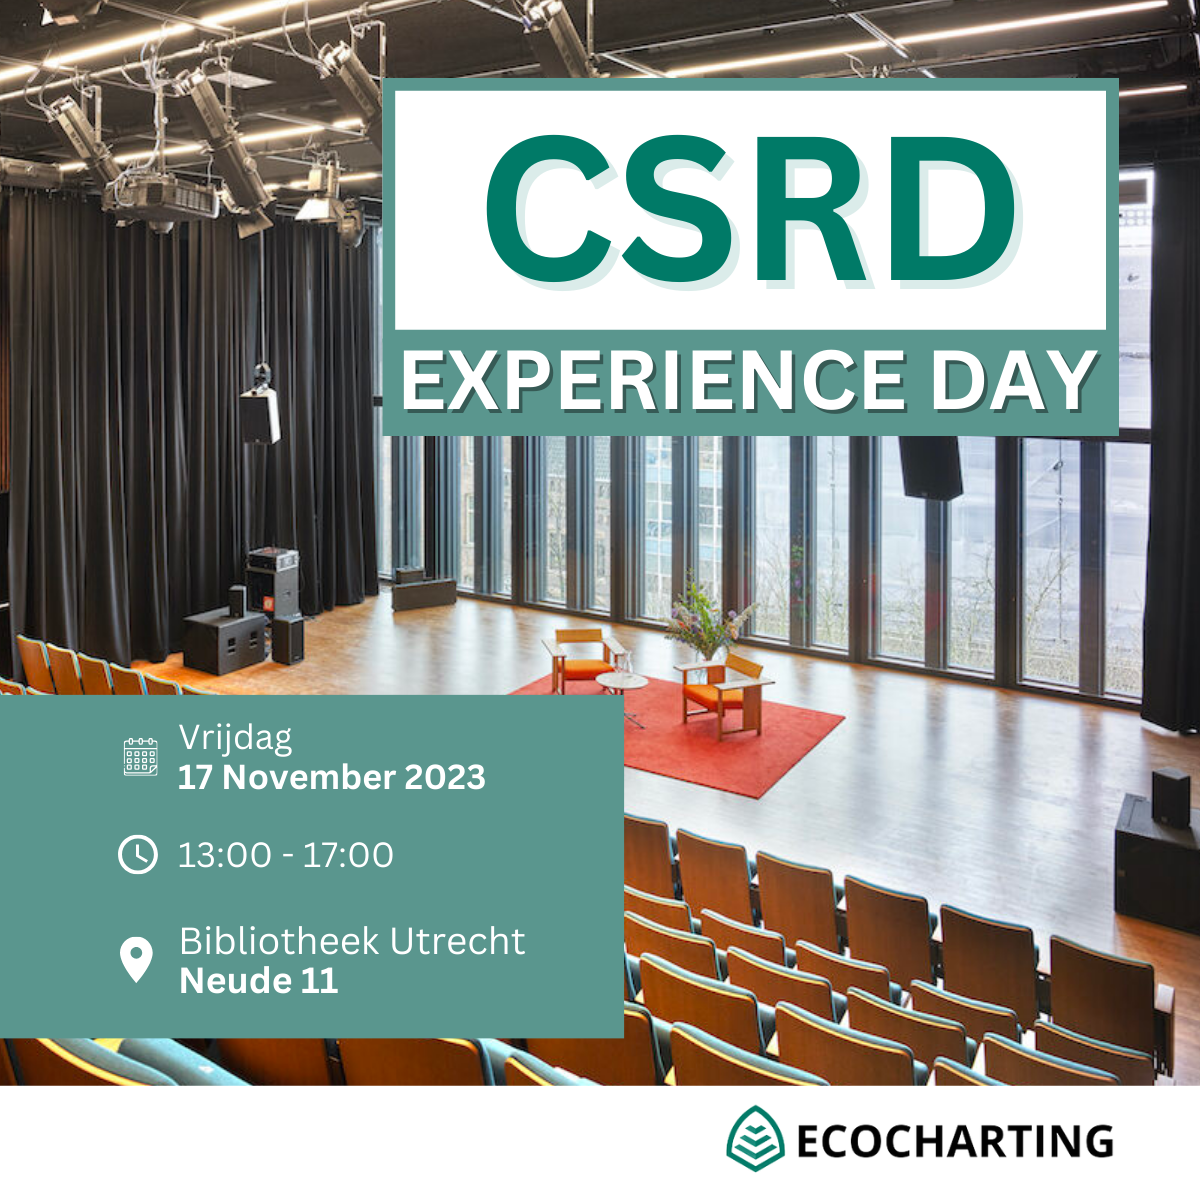 CSRD Experience Day